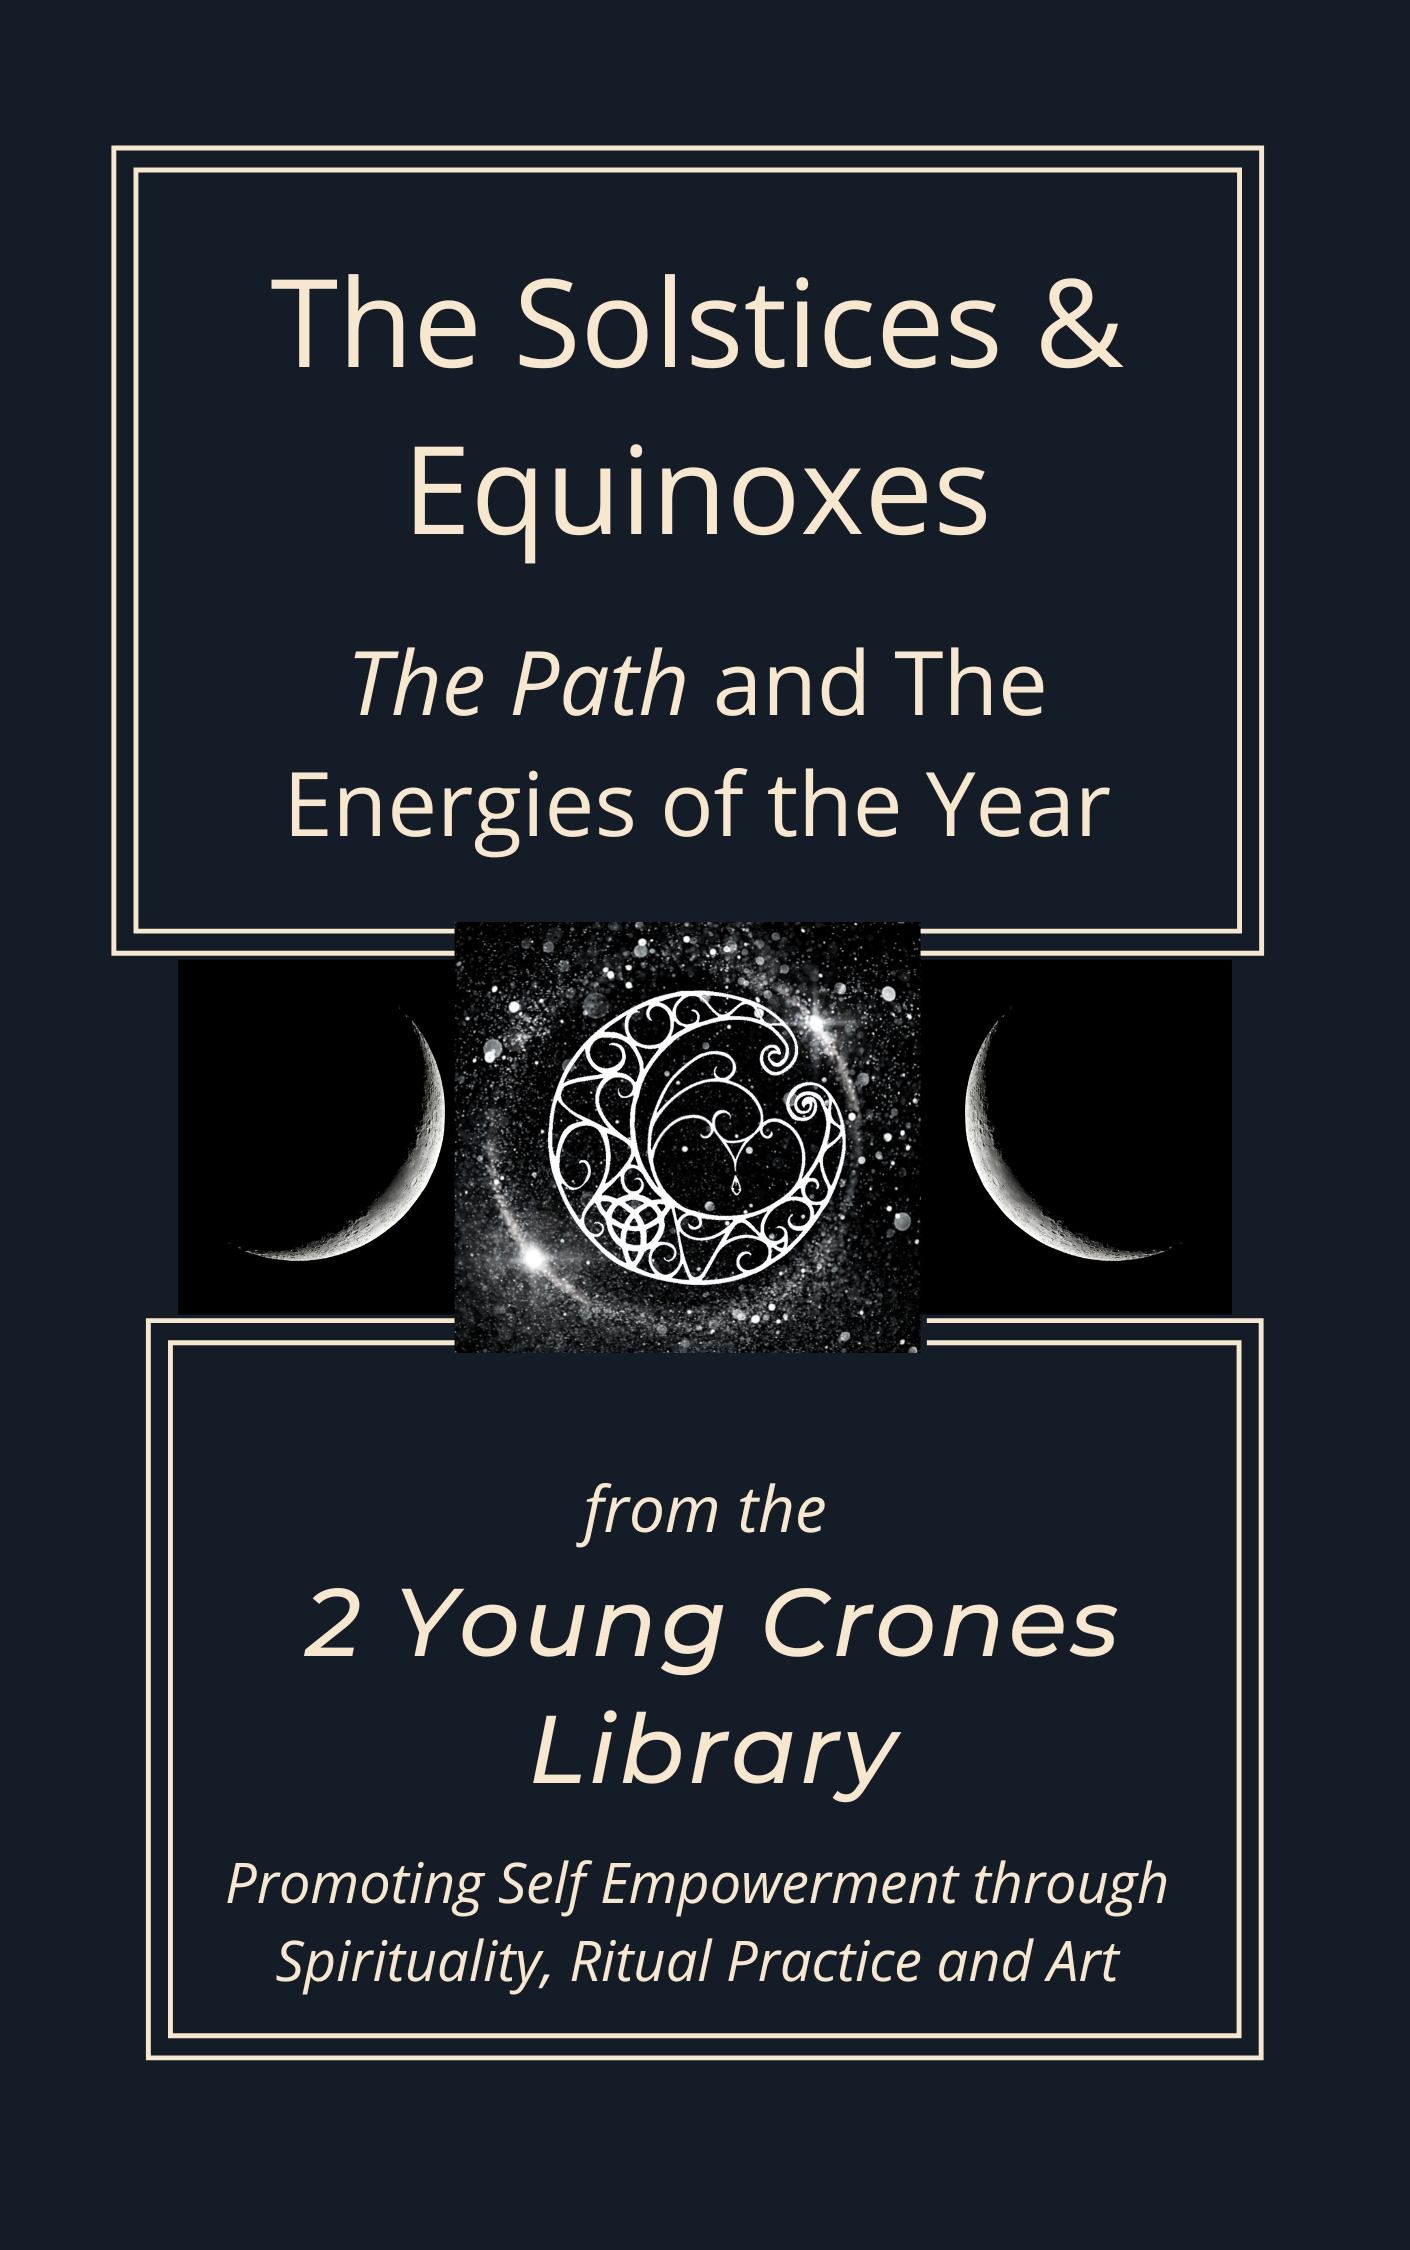 Solstices and Equinoxes: The Path and the Energies of the Year